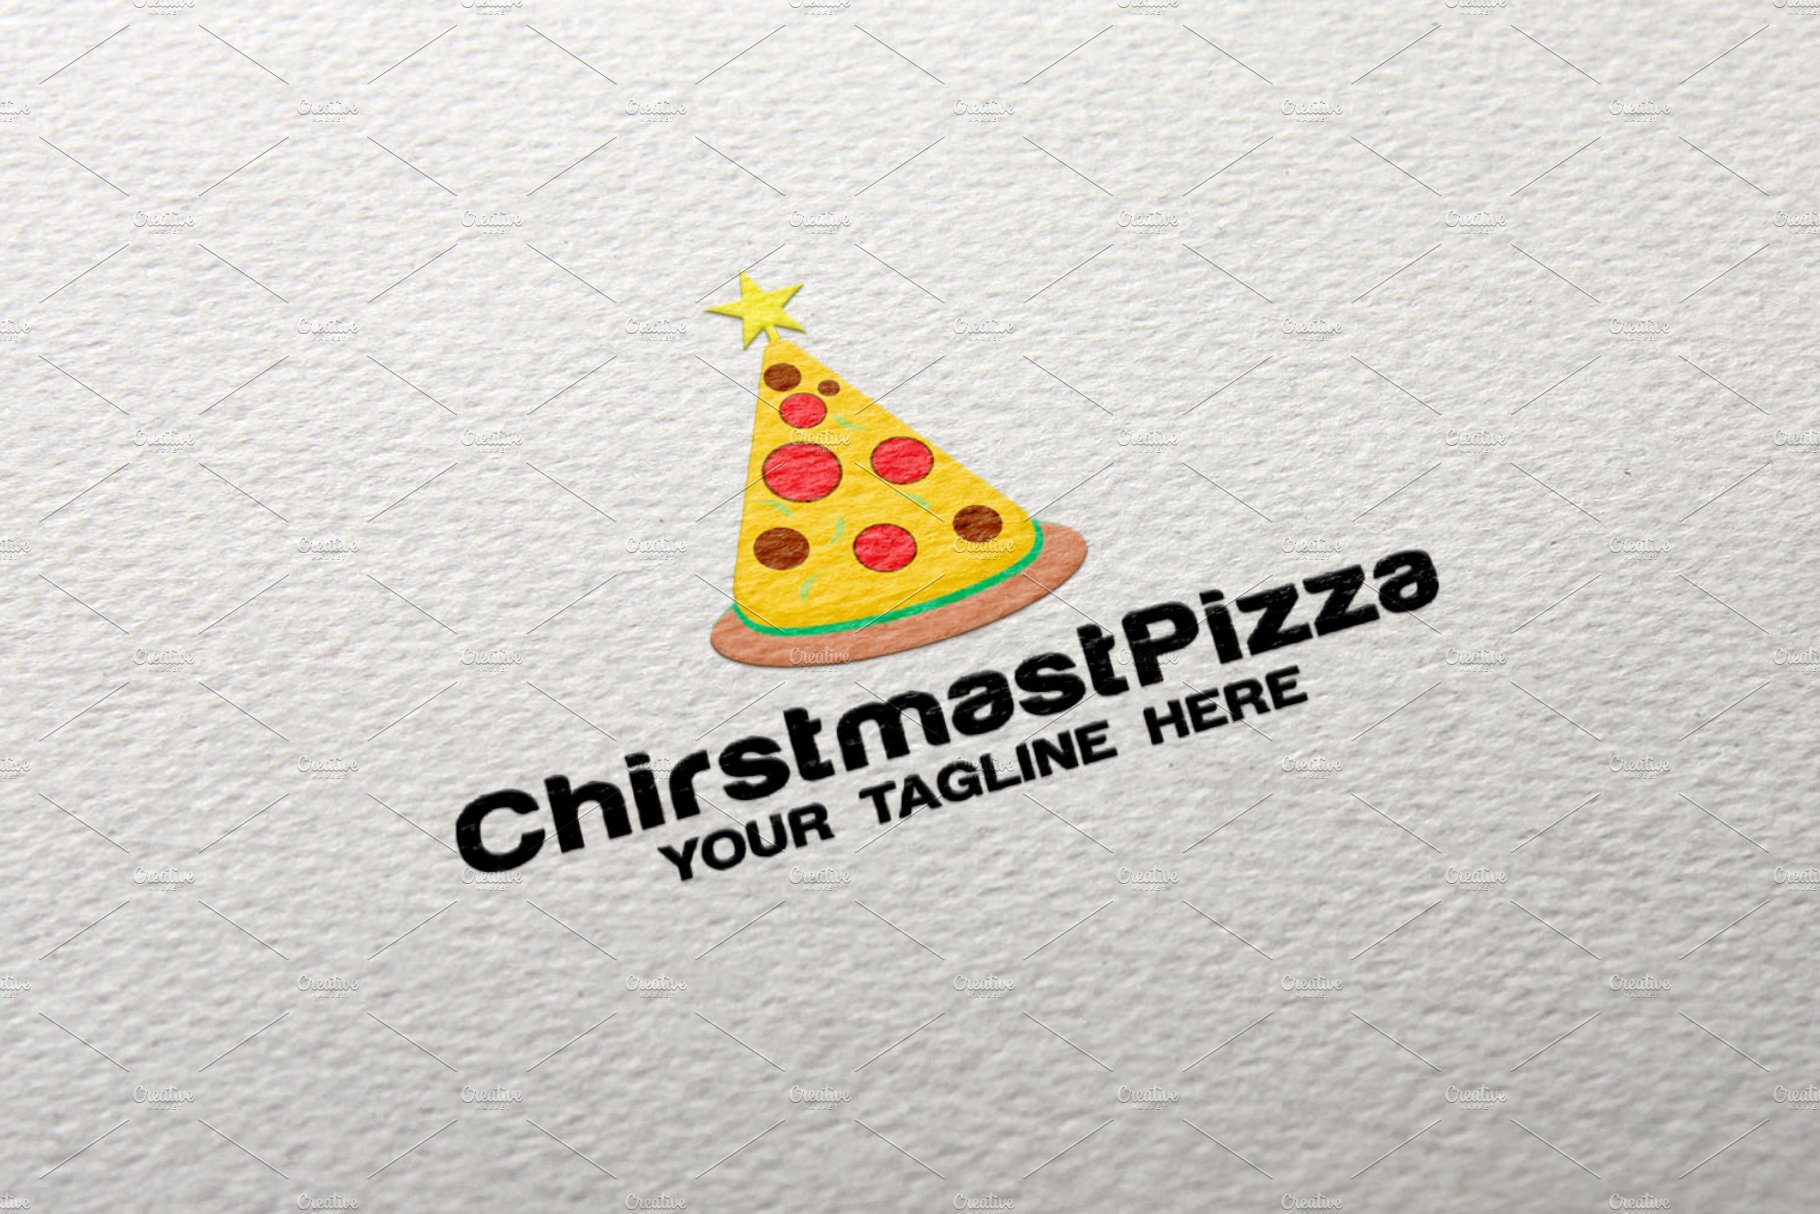 Christmast Pizza Logo cover image.